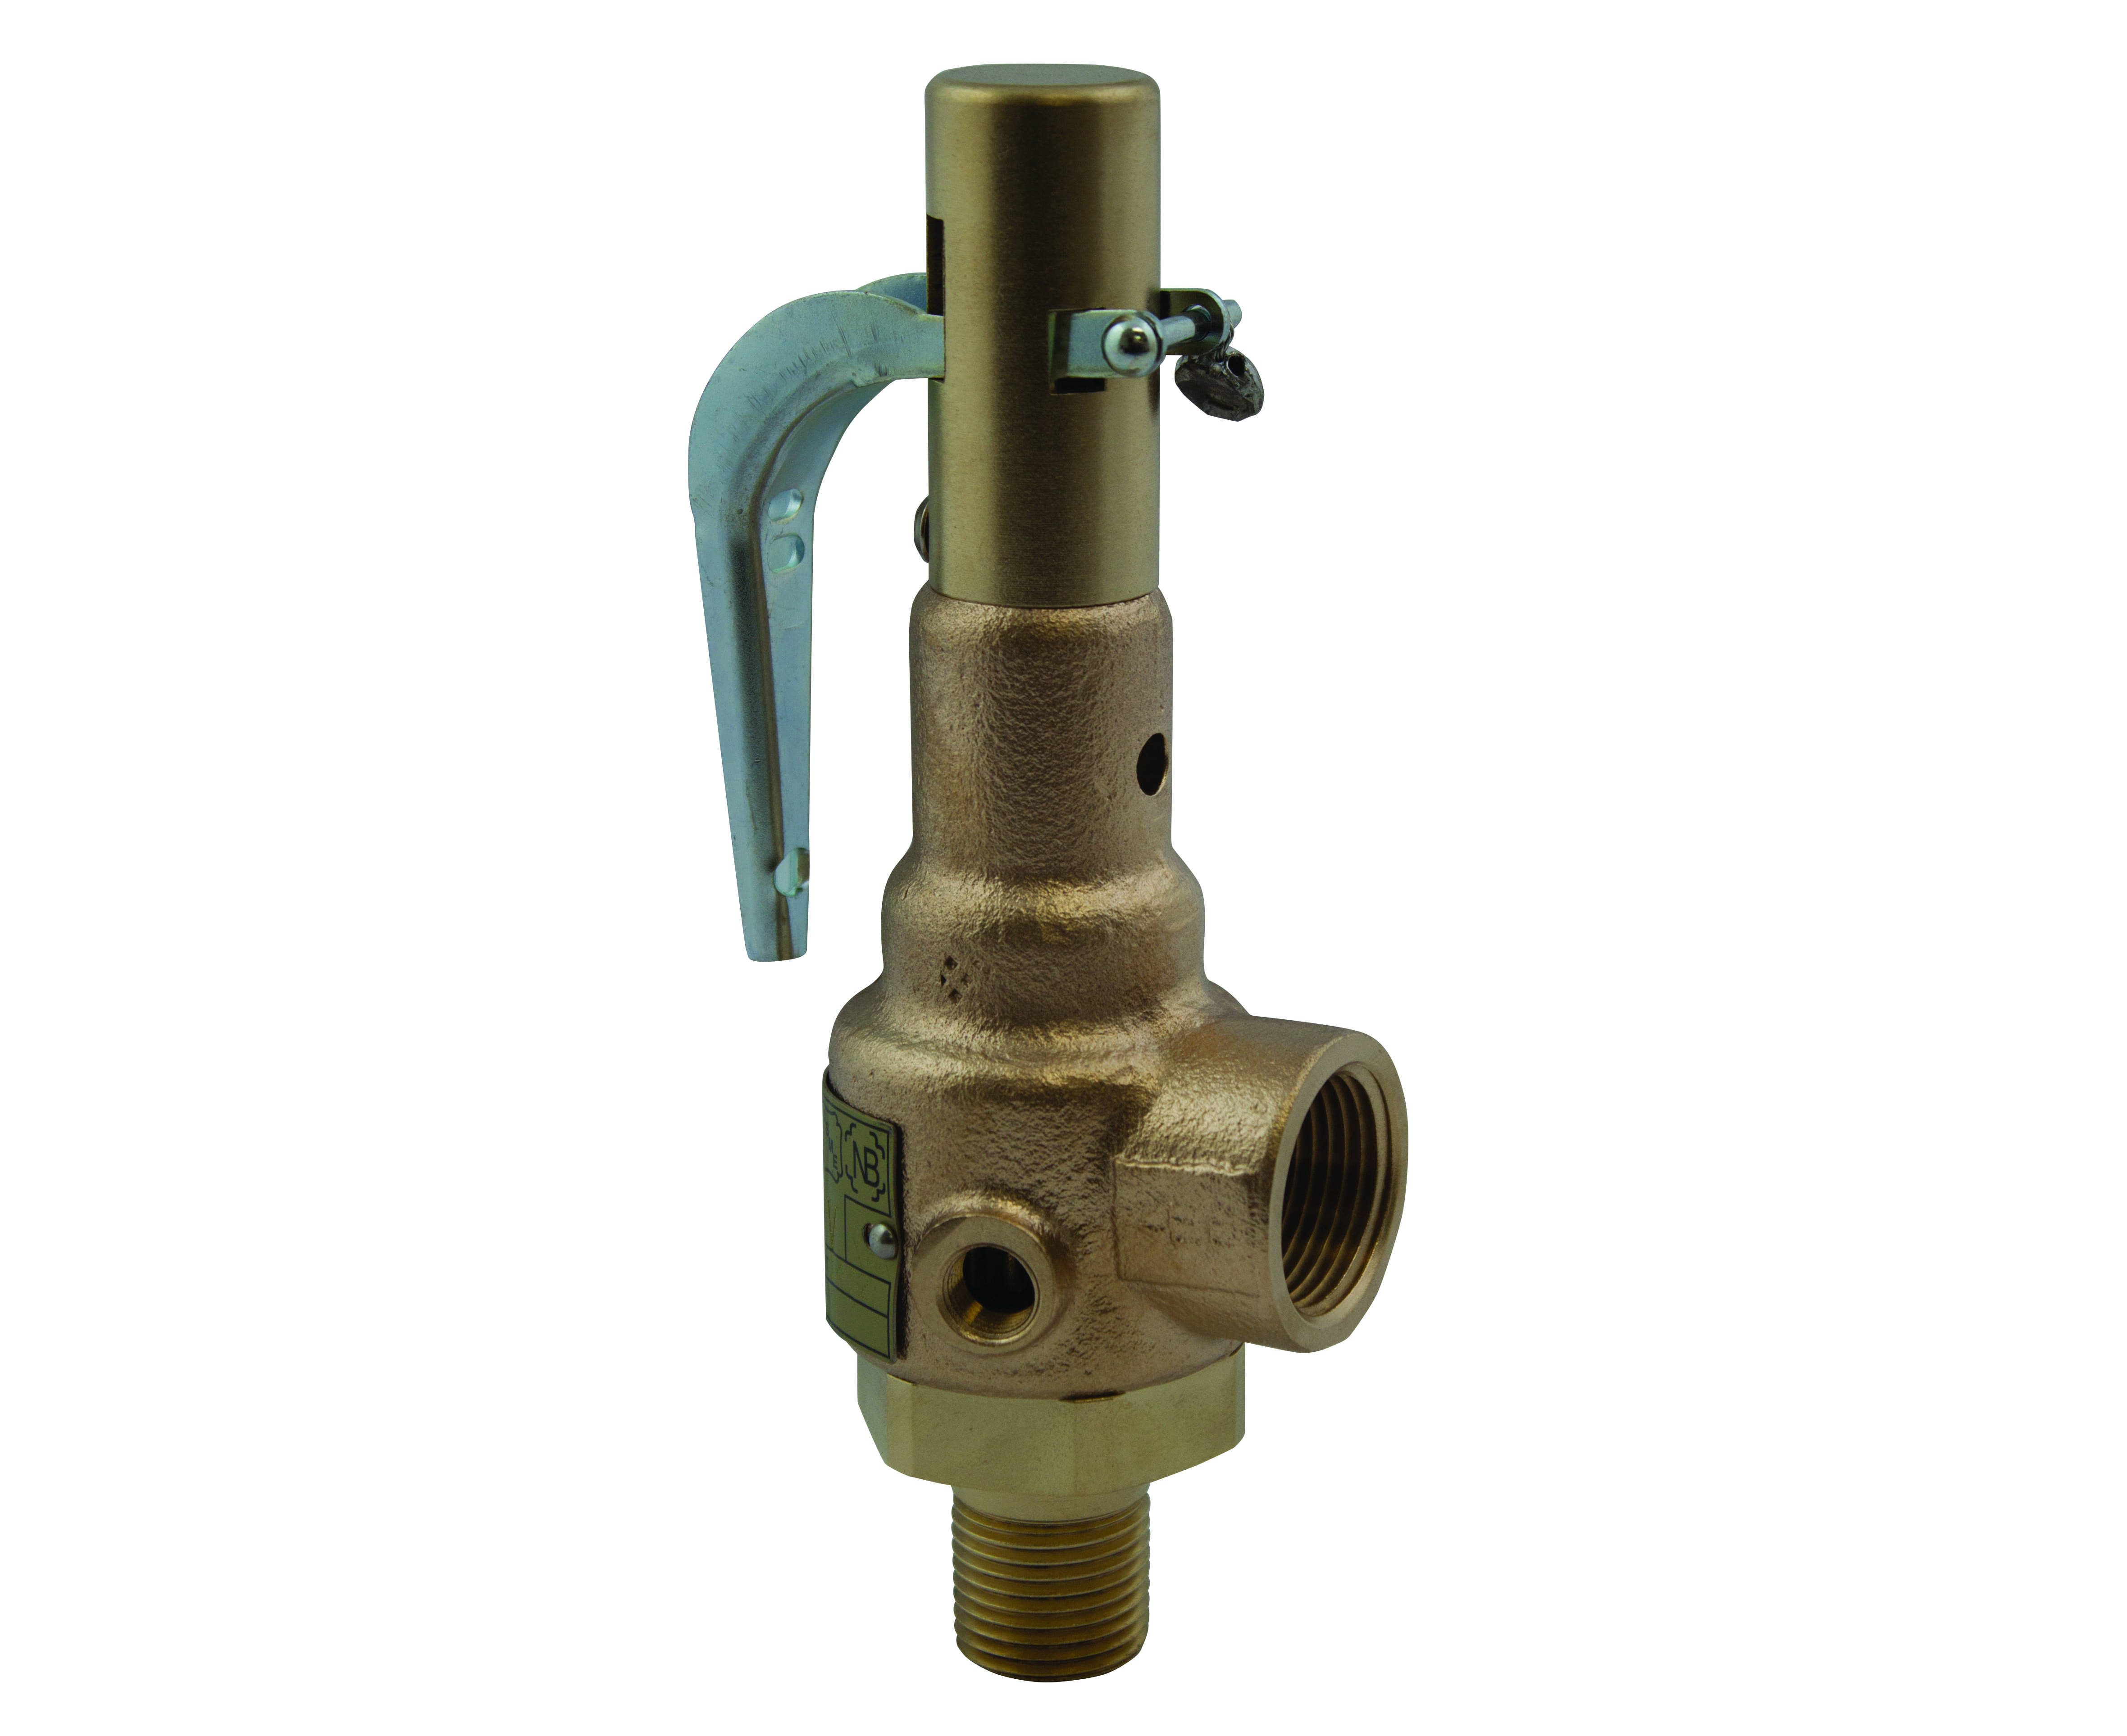 Preview image for Apollo ASME Sec VIII Steam Bronze Safety Relief Valves with Brass Trim, Teflon Seat, Performance Test Reports Included, 3/4" x 1" (MNPT x FNPT)